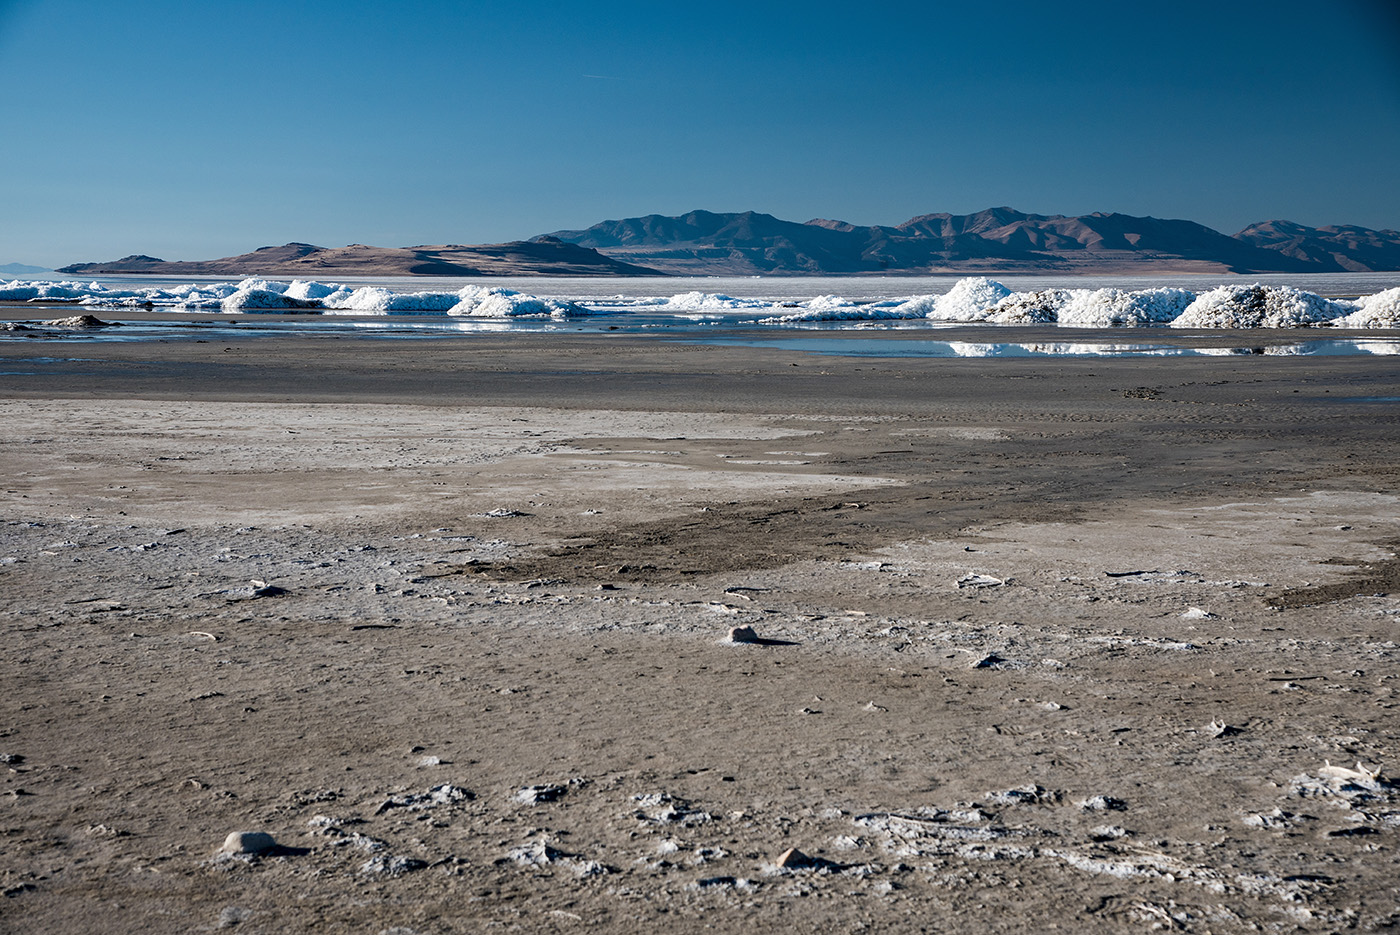 Dried, dusty, rocky ground on the lower two-thirds of the image. In the near distance, white mounds of salt pile high at the waterline of the lake. Utah's mountains rest in the far background.